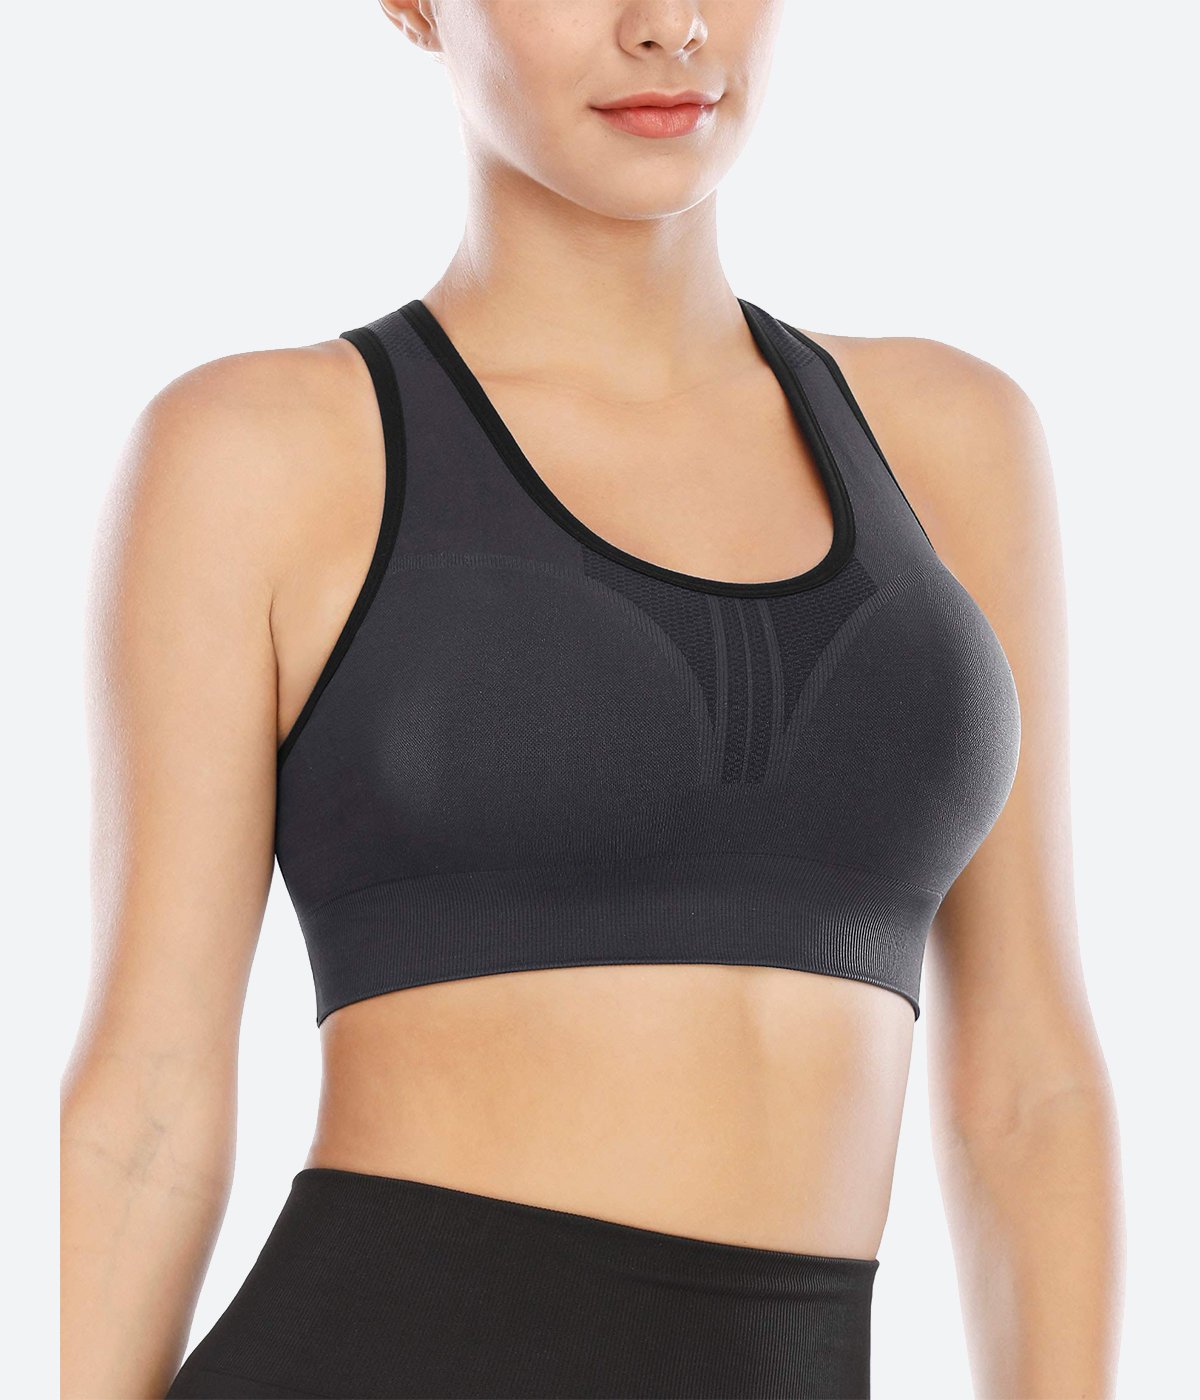 Sports Bras For Women, Yoga Bra Padded Mid Impact Support For